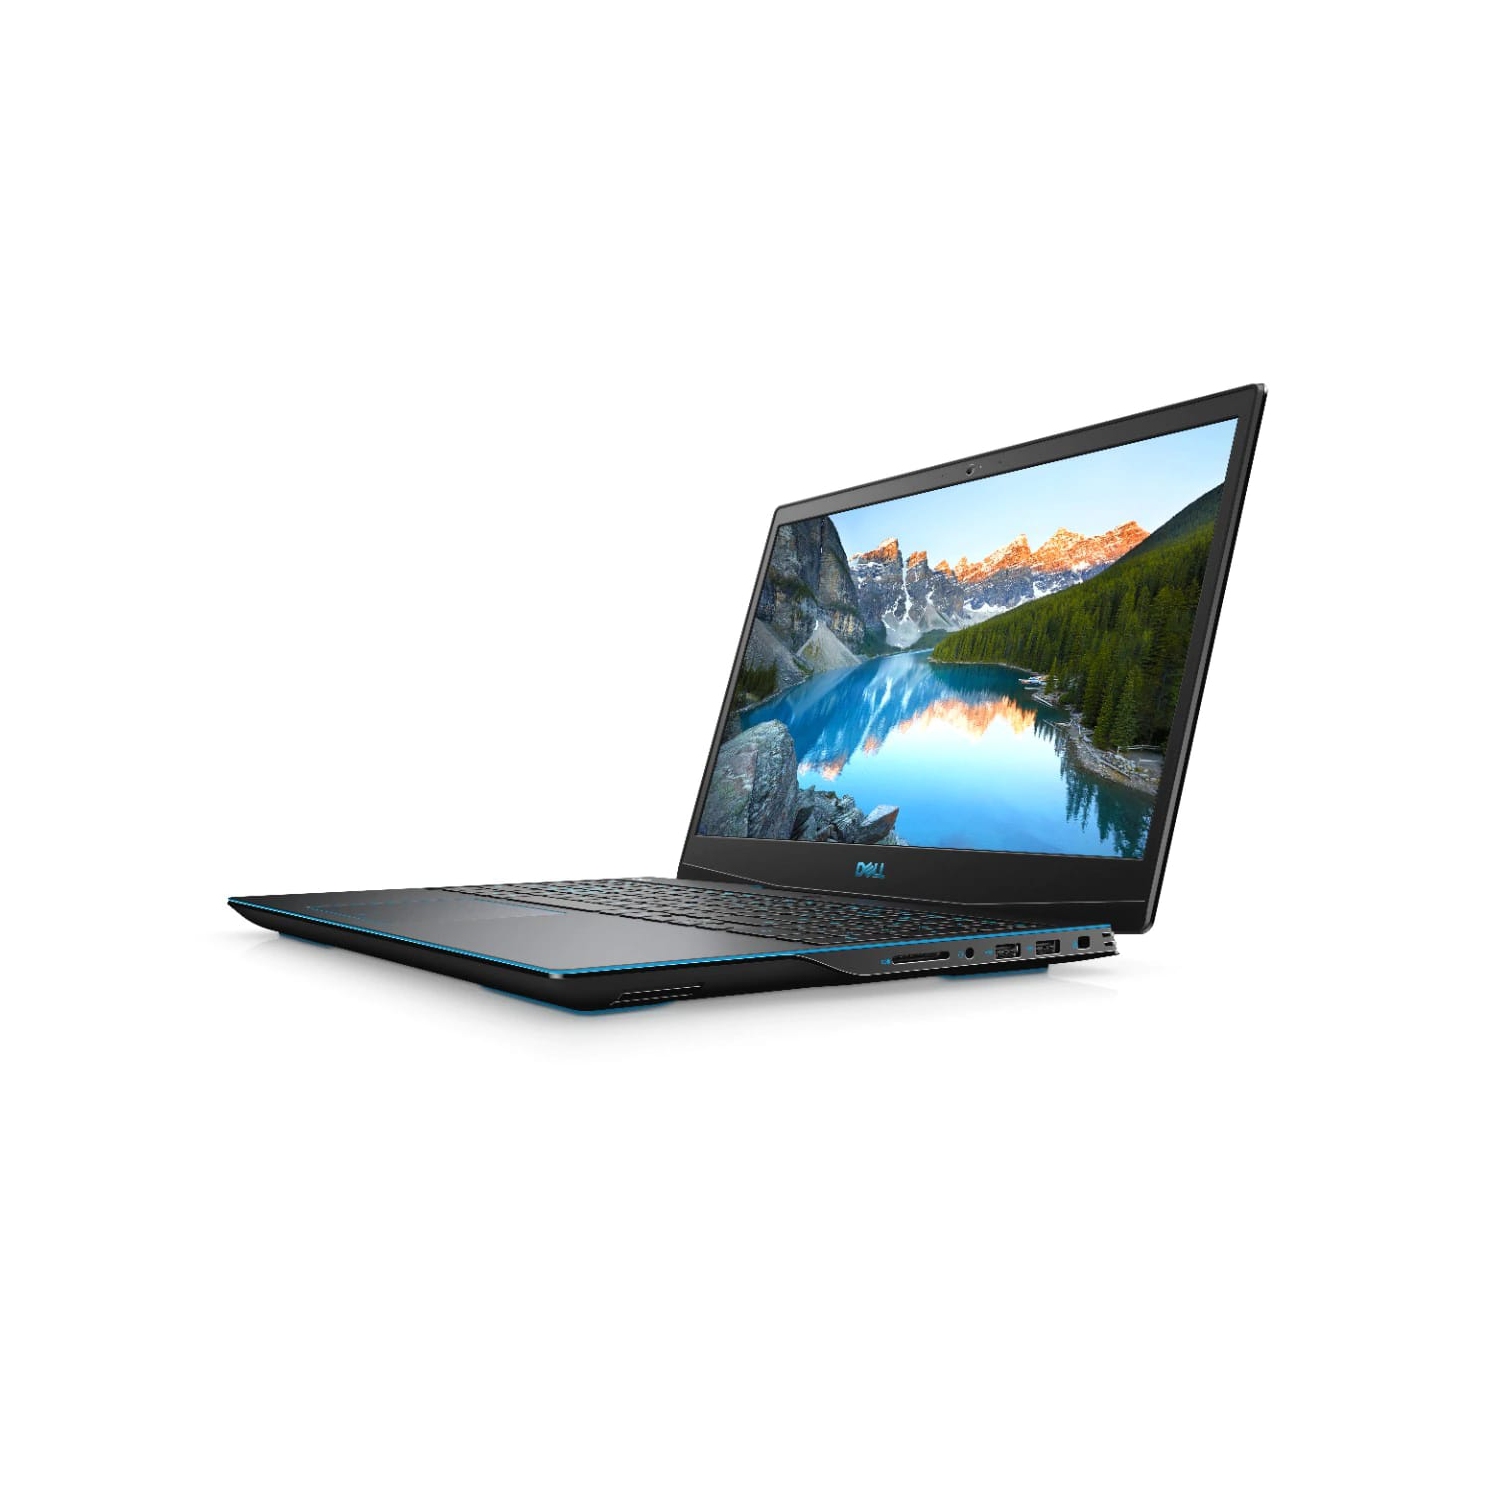 Refurbished (Excellent) - Dell G3 15 3500 Gaming Laptop (2020), 15.6" FHD, Core i5, 512GB SSD, 16GB RAM, 1660 Ti, 4 Cores @ 4.5 GHz, 10th Gen CPU Certified Refurbished